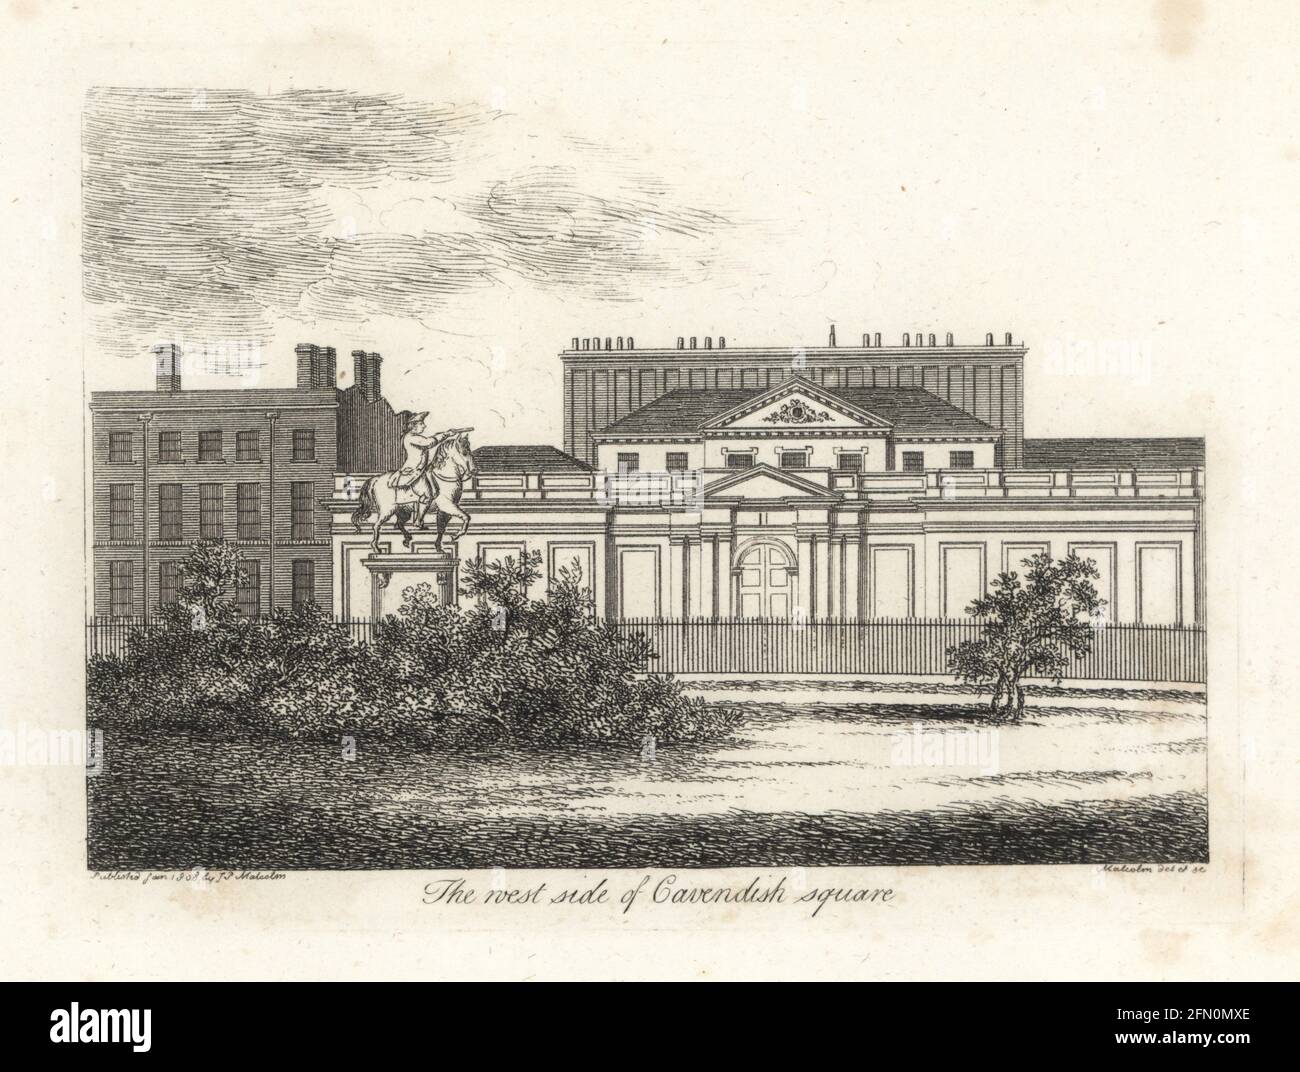 West side of Cavendish Square, London, 1807. Bingley House, a palatial mansion built in 1722 by Thomas Archer for Robert Benson, 1st Baron Bingley, and Francis Shepheard's five-bay house.  Equestrian statue of the Duke of Cumberland, the Butcher of Culloden., removed in 1868. Copperplate drawn and engraved by James Peller Malcolm from his Anecdotes of the Manners and Customs of London during the 18th Century, Longman, Hurst, London, 1808. Malcolm (1767-1815) was an American-English topographer and engraver, Fellow of the Society of Antiquaries. Stock Photo